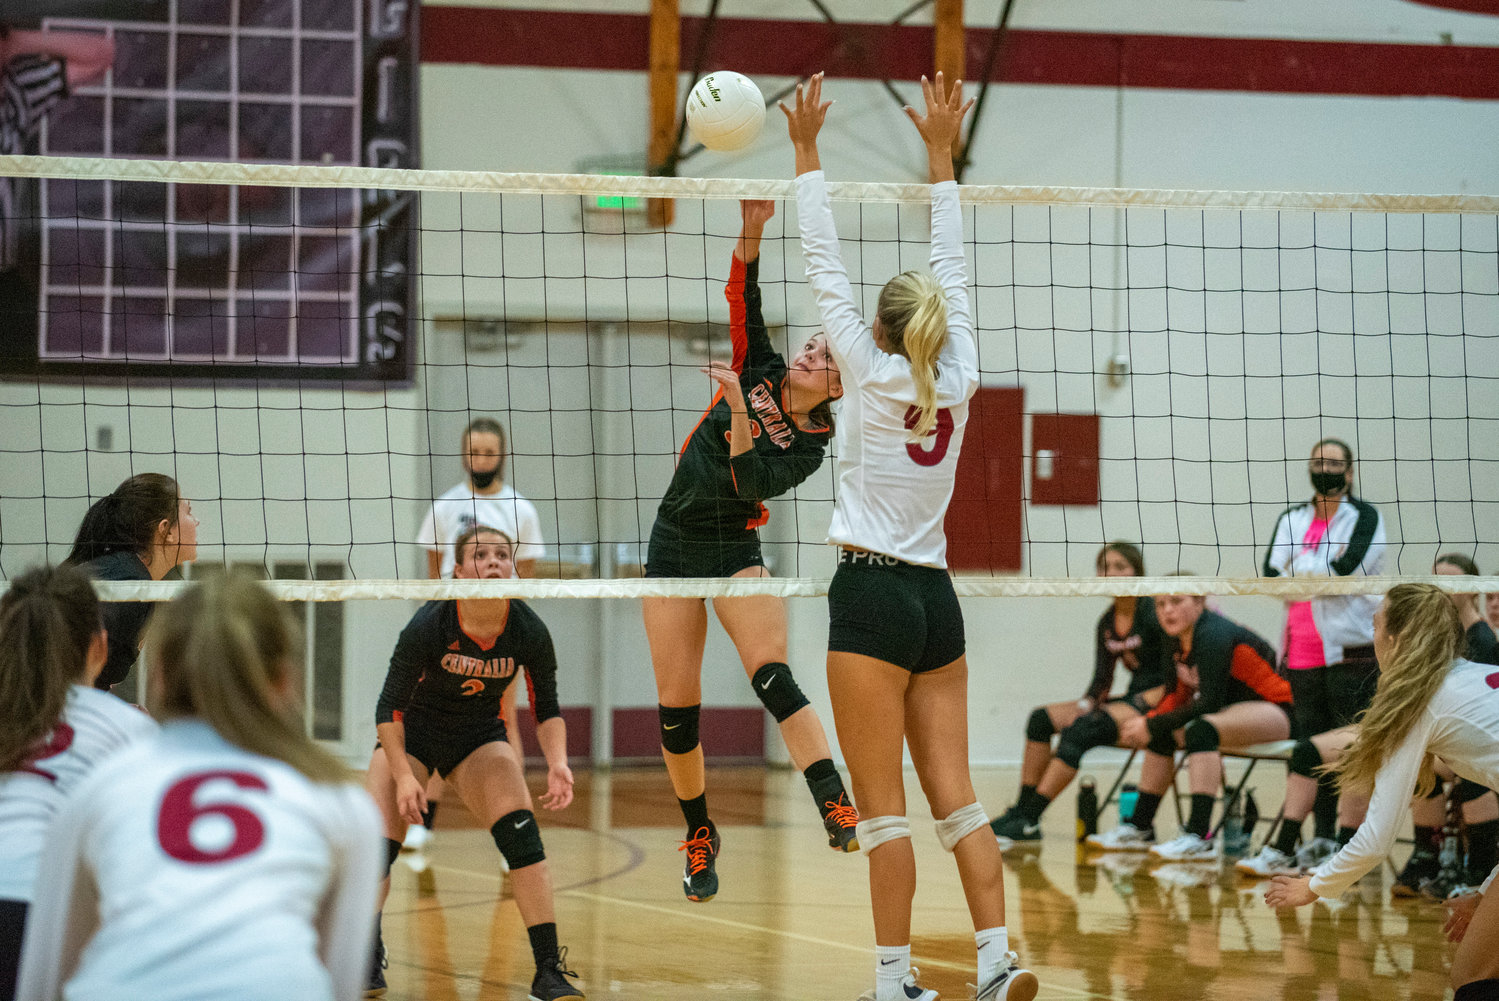 FILE PHOTO -- Centralia's Ella Orr (3) spikes the ball past W.F. West's Ava Olsen (9) during the first leg of the Swamp Cup Oct. 12 in Chehalis.